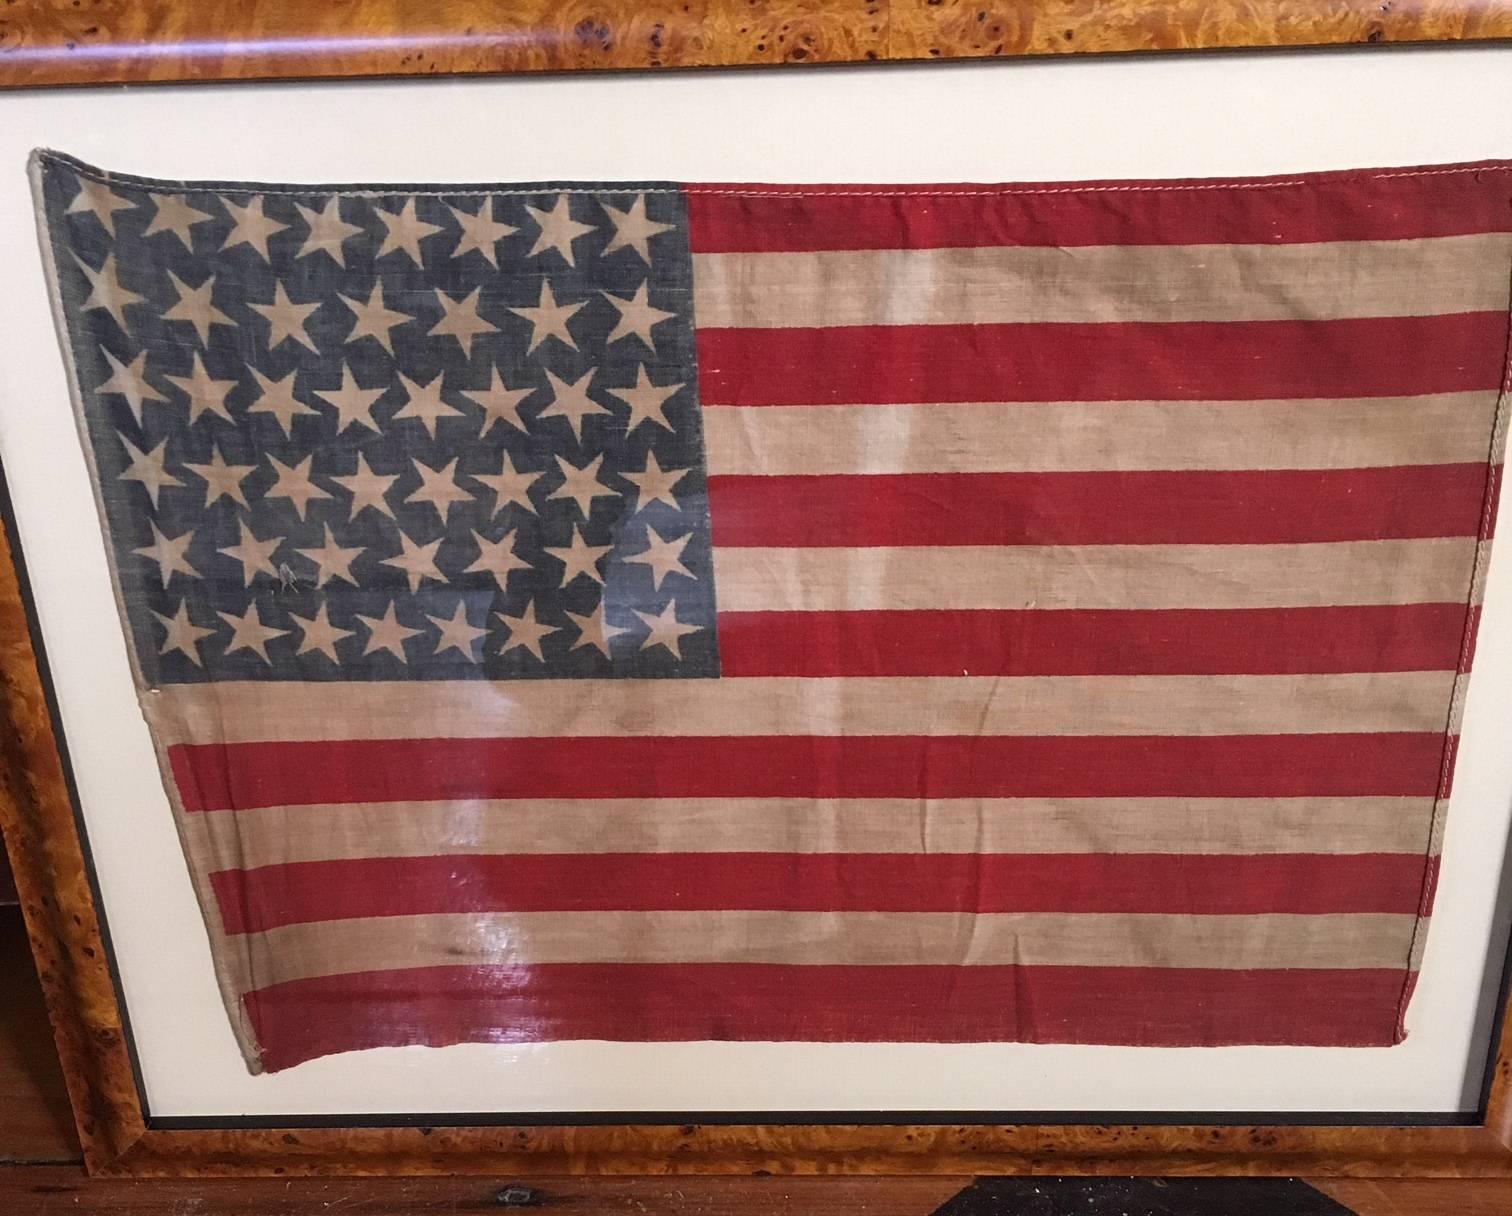 Antique American parade flag with 46 stars, made when 